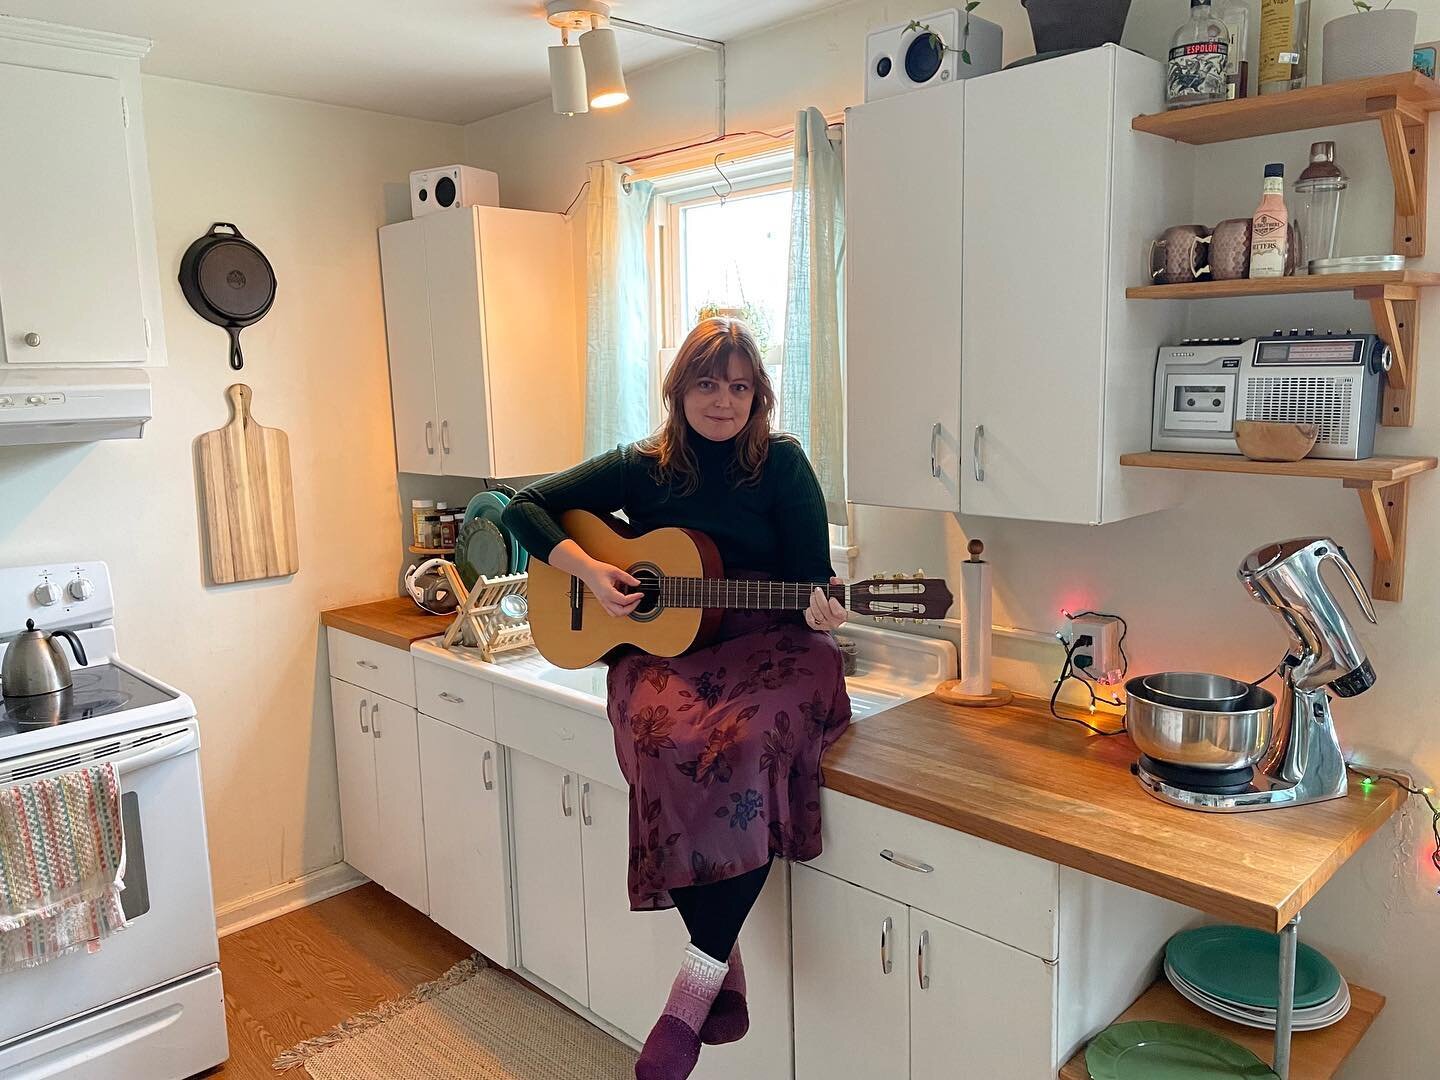 On MEASURE, POUR &amp; MIXTAPE: MUSIC FOR COOKING, Nashville songwriter @lou__turner (@styrofoamwinos) gives us &ldquo;Ride The Melting.&rdquo; Featuring the sound of butter browning and inspired by a Robert Frost line, she confesses her recent appro